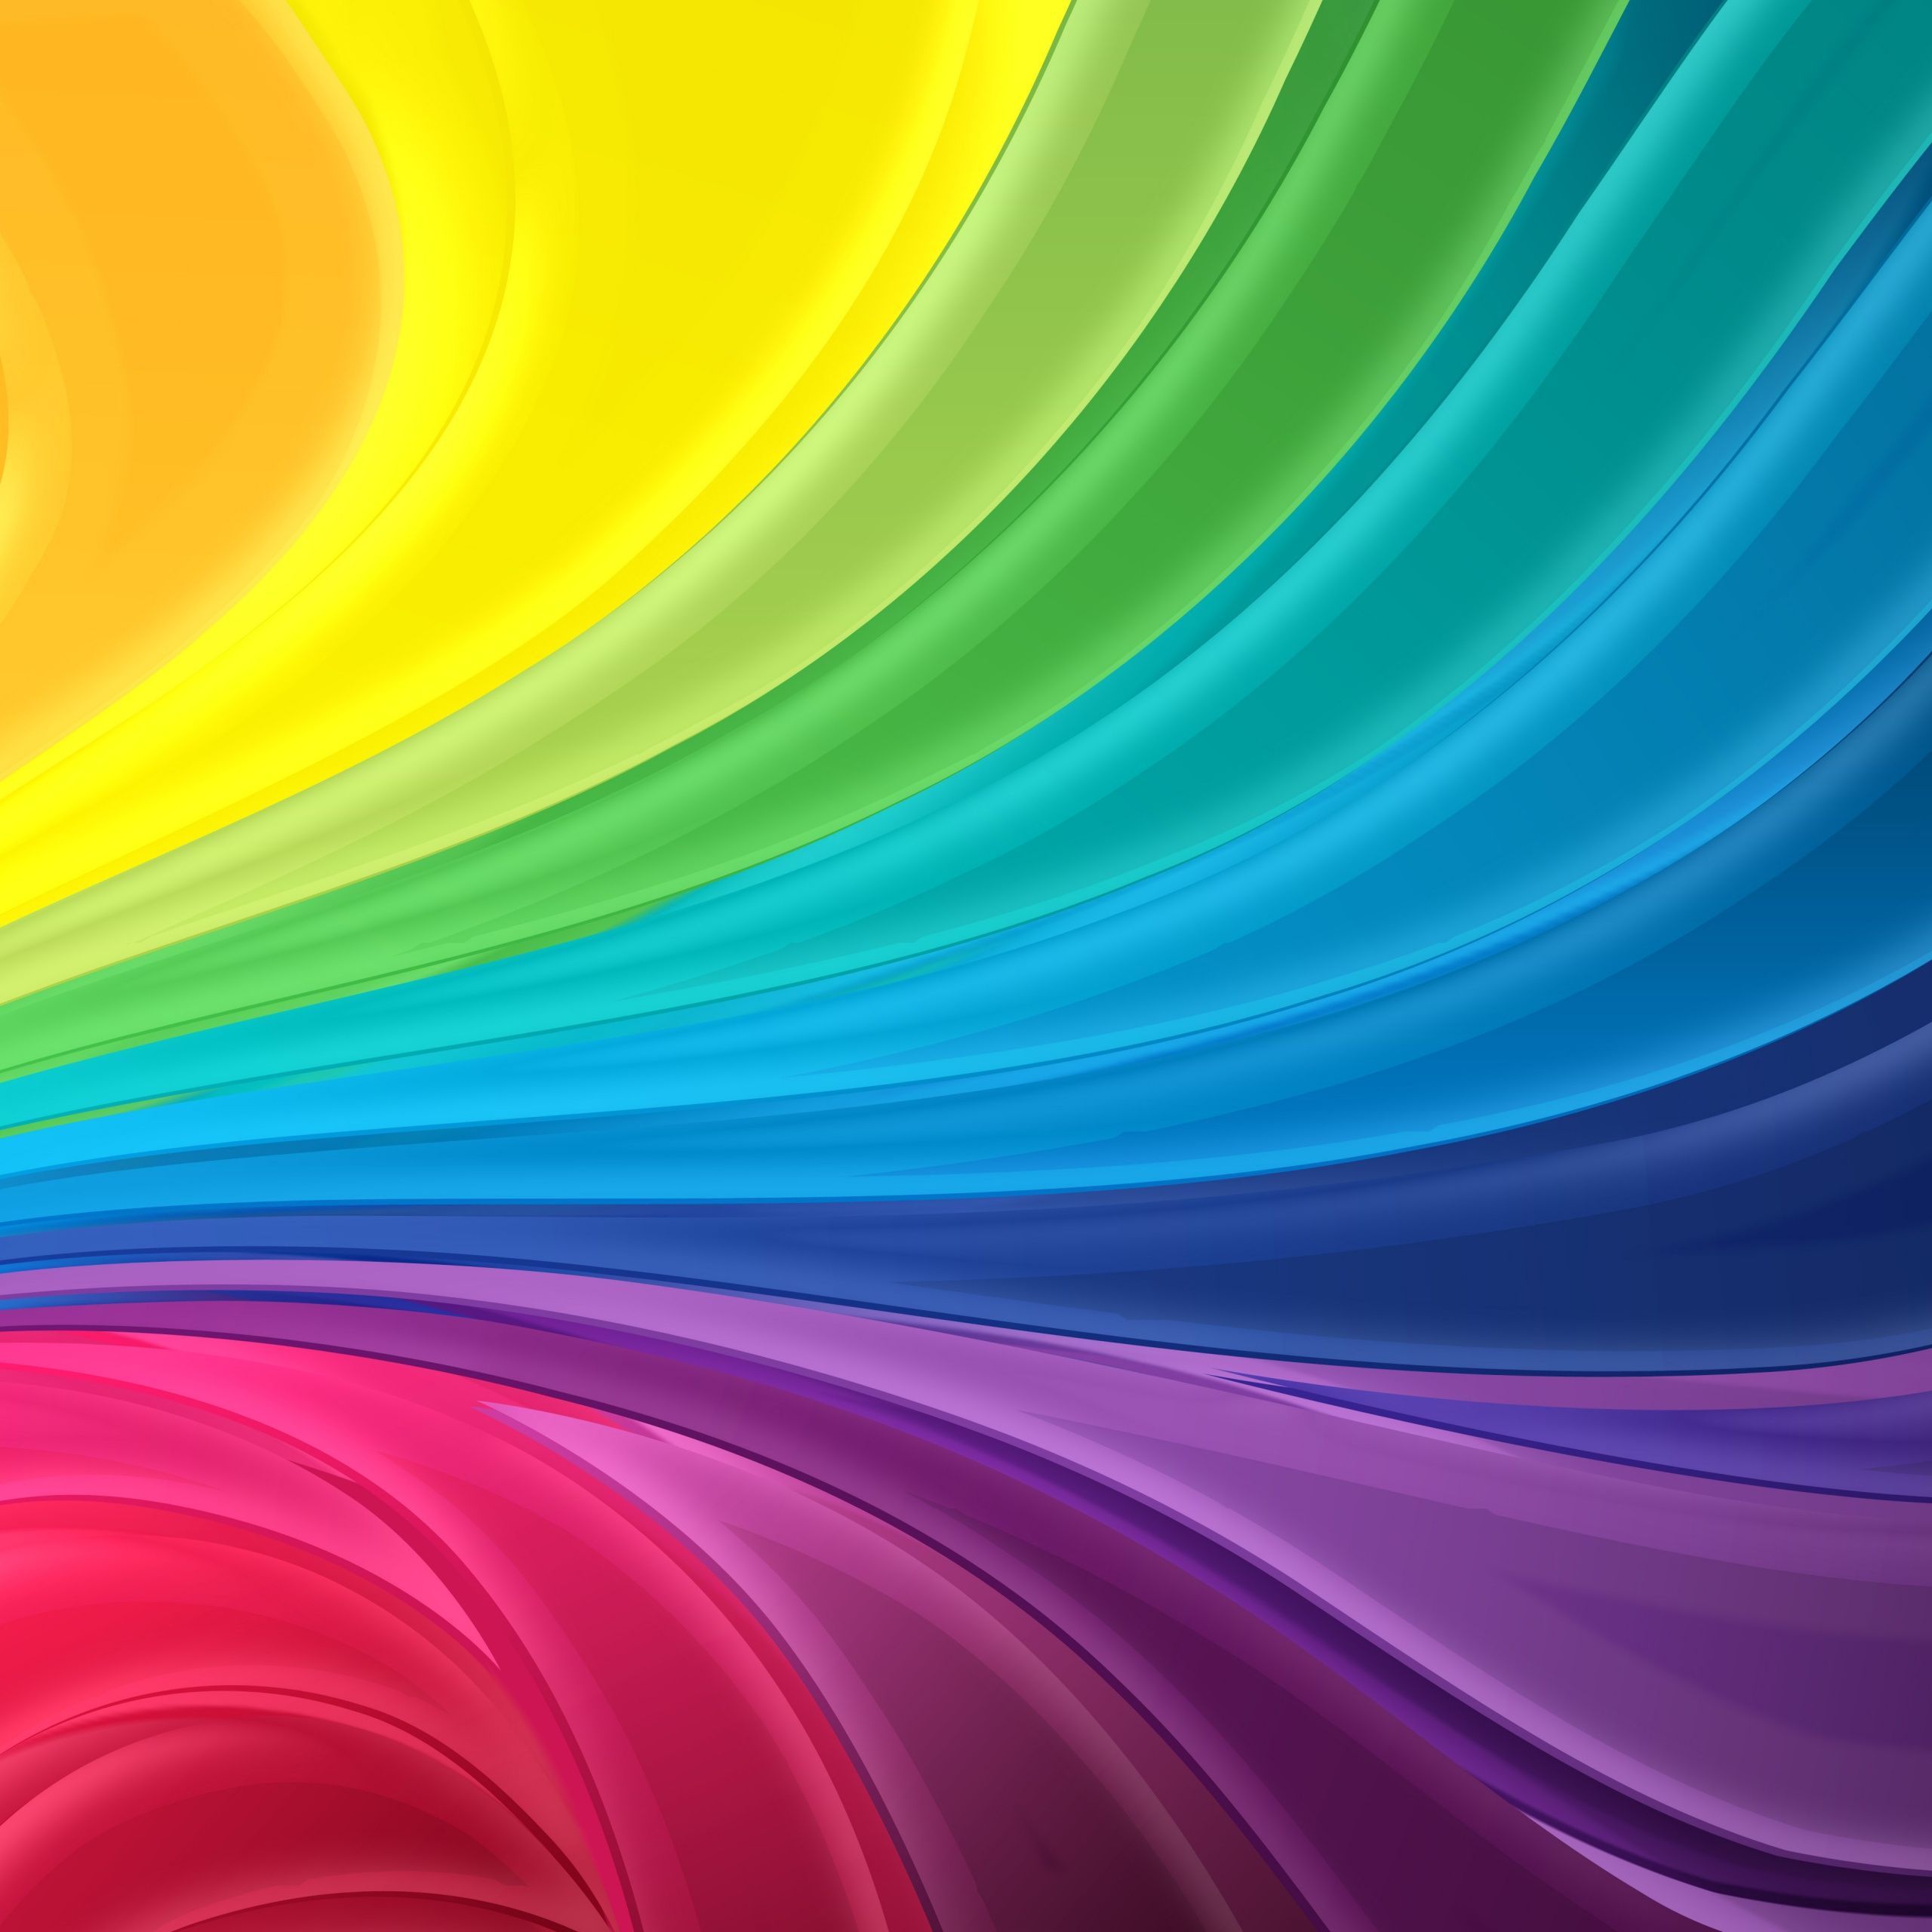 Rainbow colors Wallpaper 4K, Colorful, Multi color, Abstract